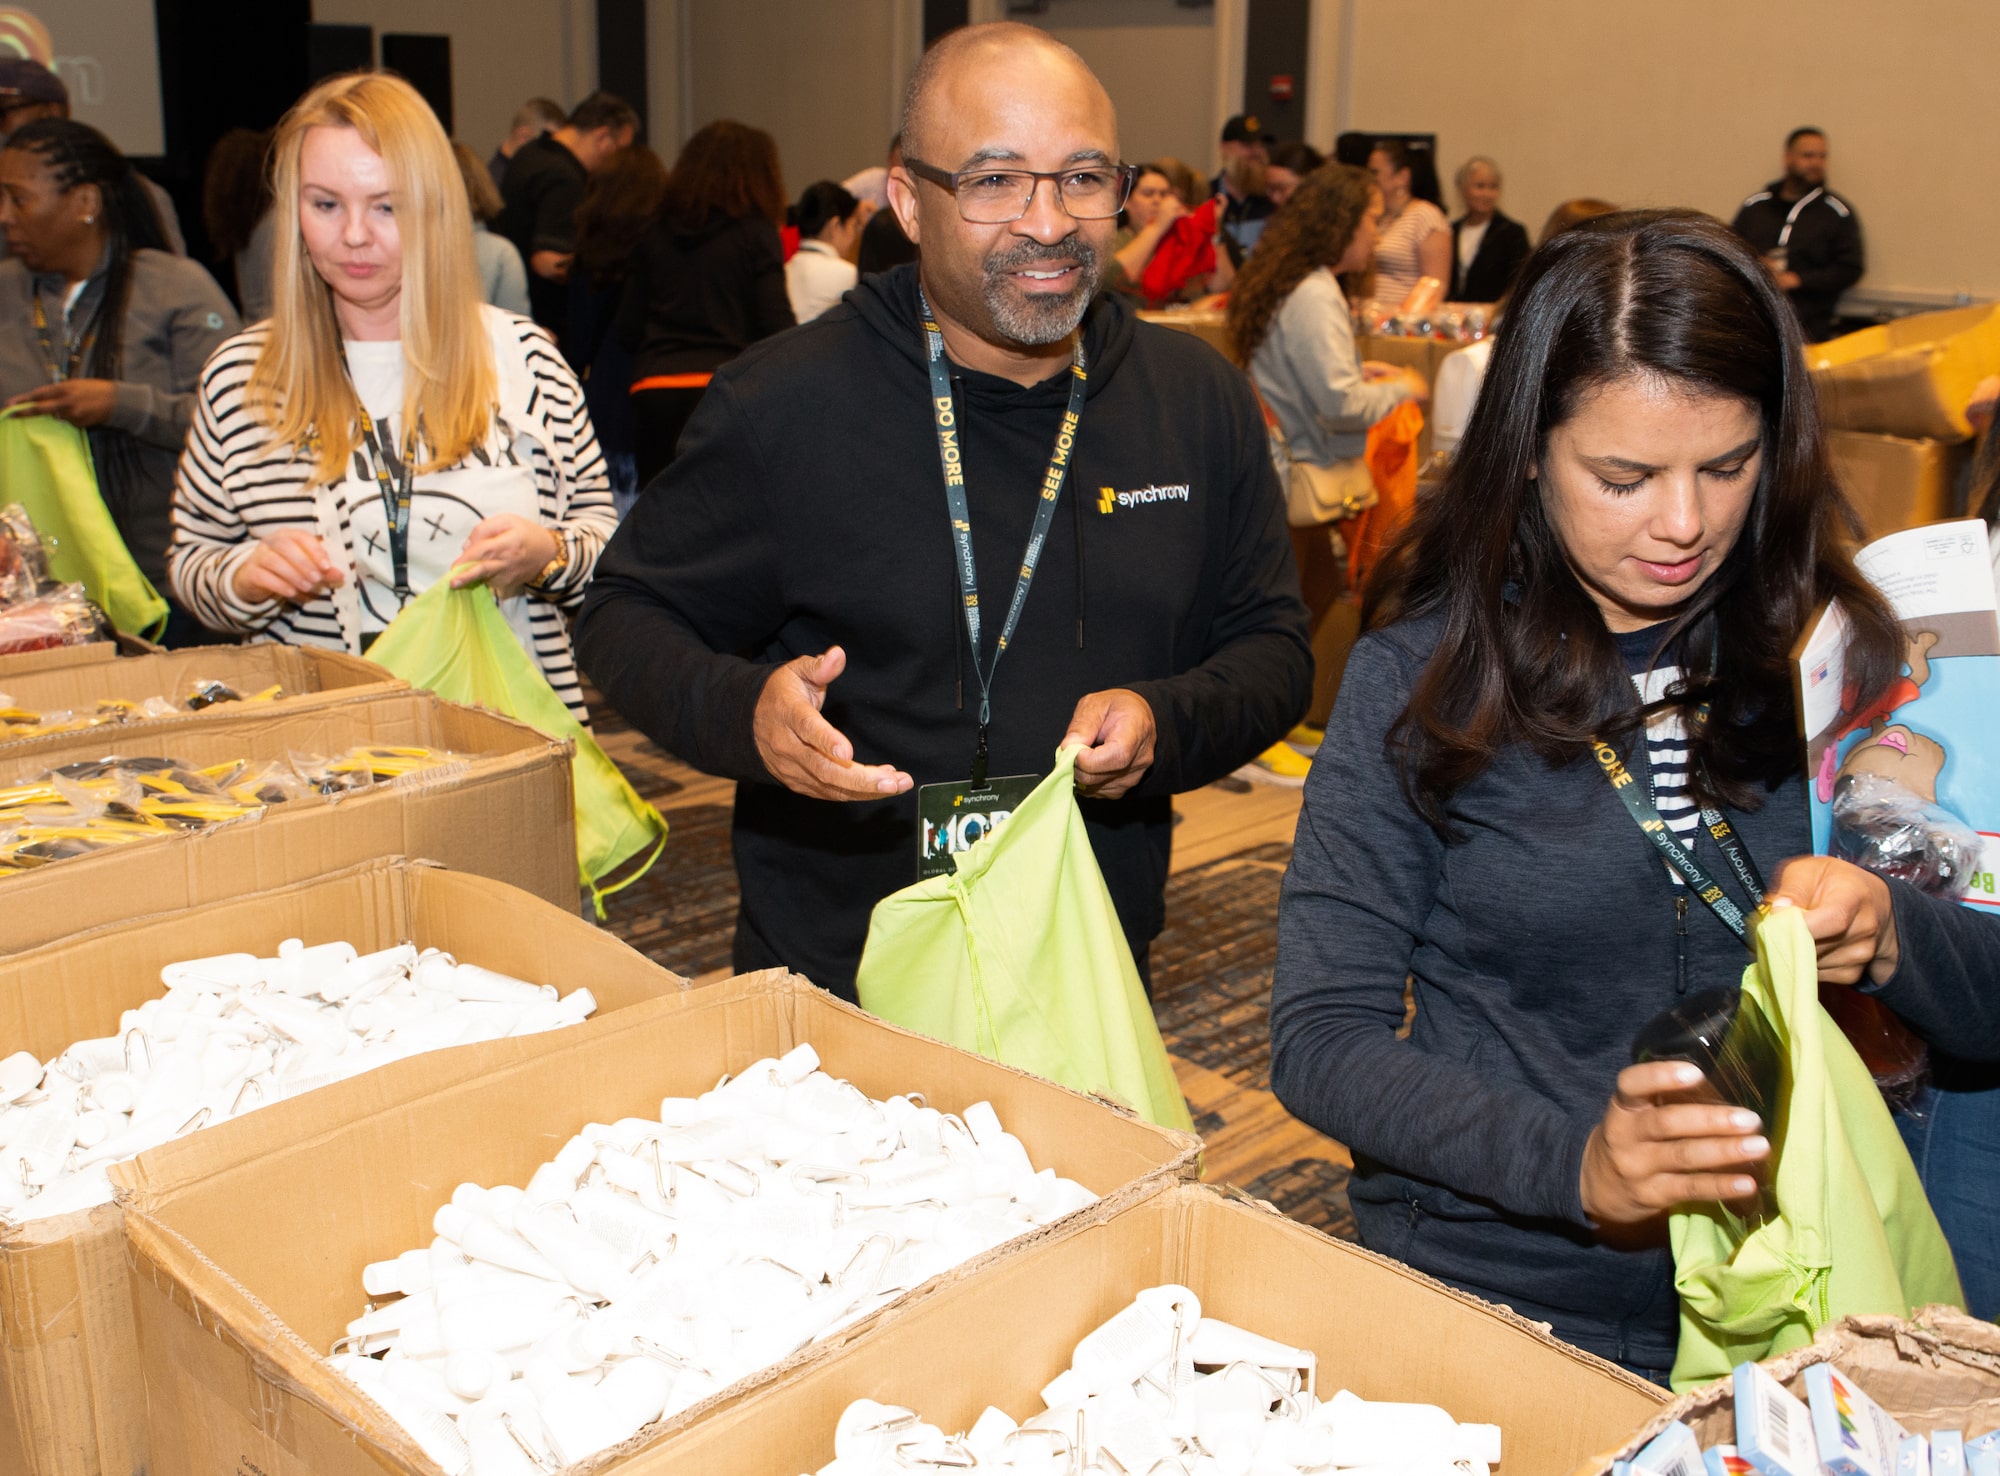 Synchrony employees participated in a volunteer event where they assembled 10,000 activity kits that included financial education resources to support Chicago, IL elementary and college students. This is part of the company’s Global Diversity Experience where employees engaged in panel discussions, workshops and community service initiatives. (Photo credit: TheWrightVision for Synchrony)